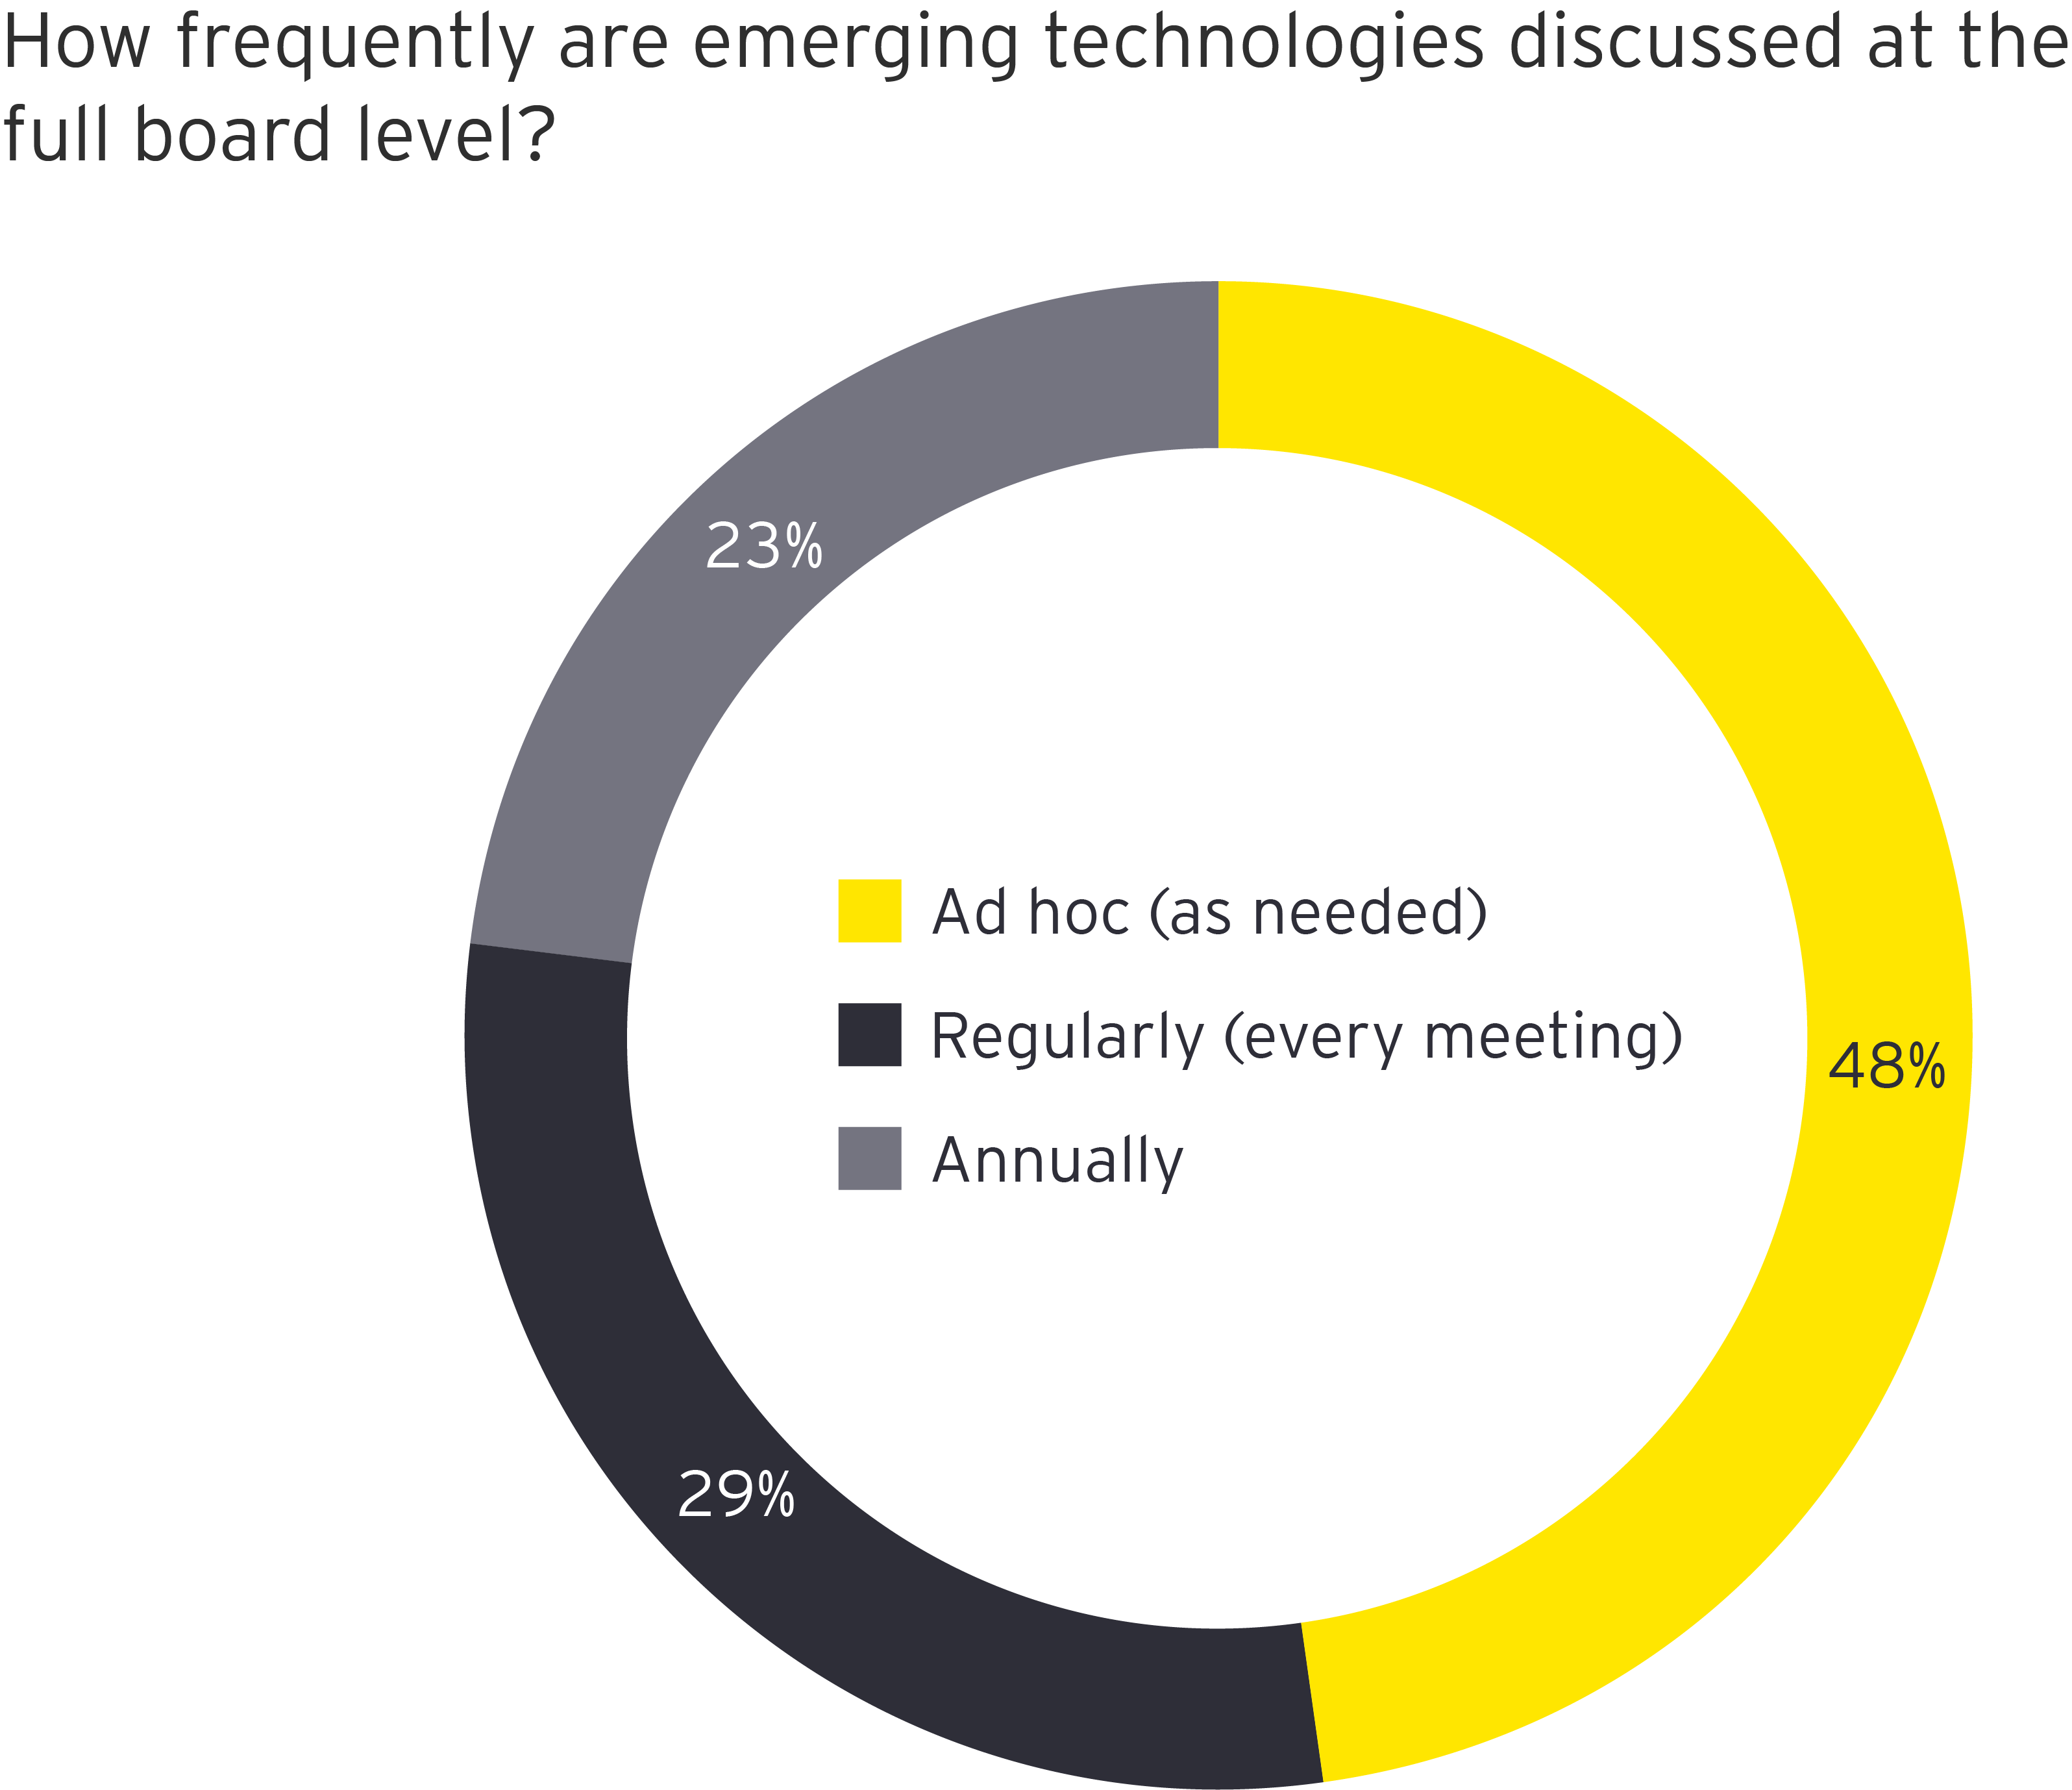 How frequently are emerging technologies discussed at the full board level?